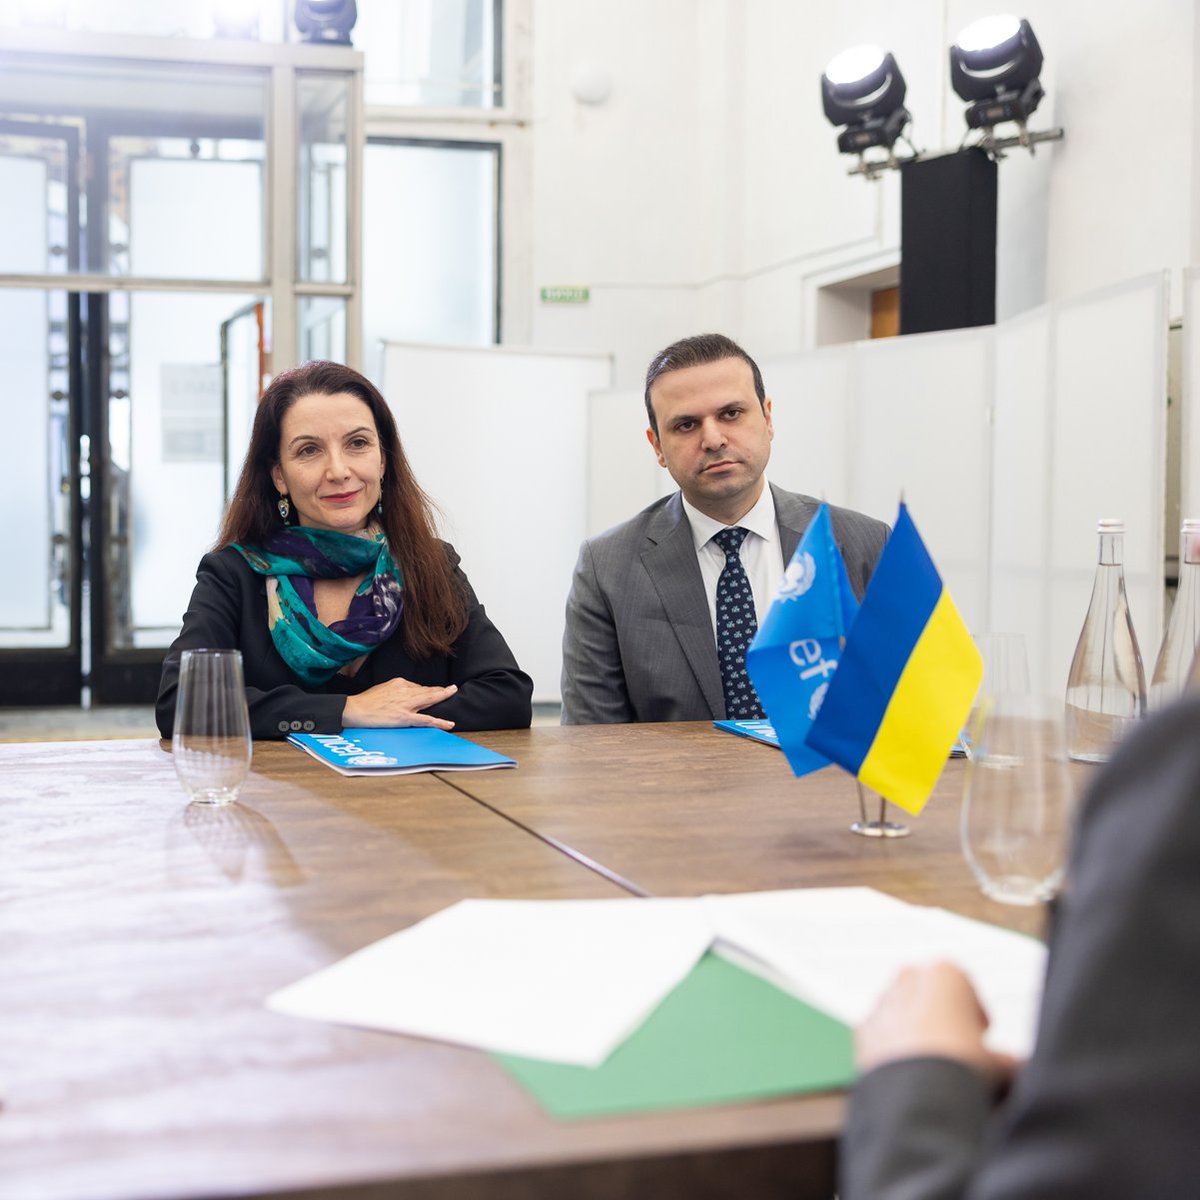 @R_DeDominicis @UNICEF_ECA @MunirMammadzade @UNICEF_UA Was glad to meet again with @R_DeDominicis, Director of @UNICEF_ECA, and @MunirMammadzade, Head of @UNICEF_UA in Kyiv. Discussed the projects we are implementing together: mental health program and its regional cases, school nutrition reform, and development of family-based care.